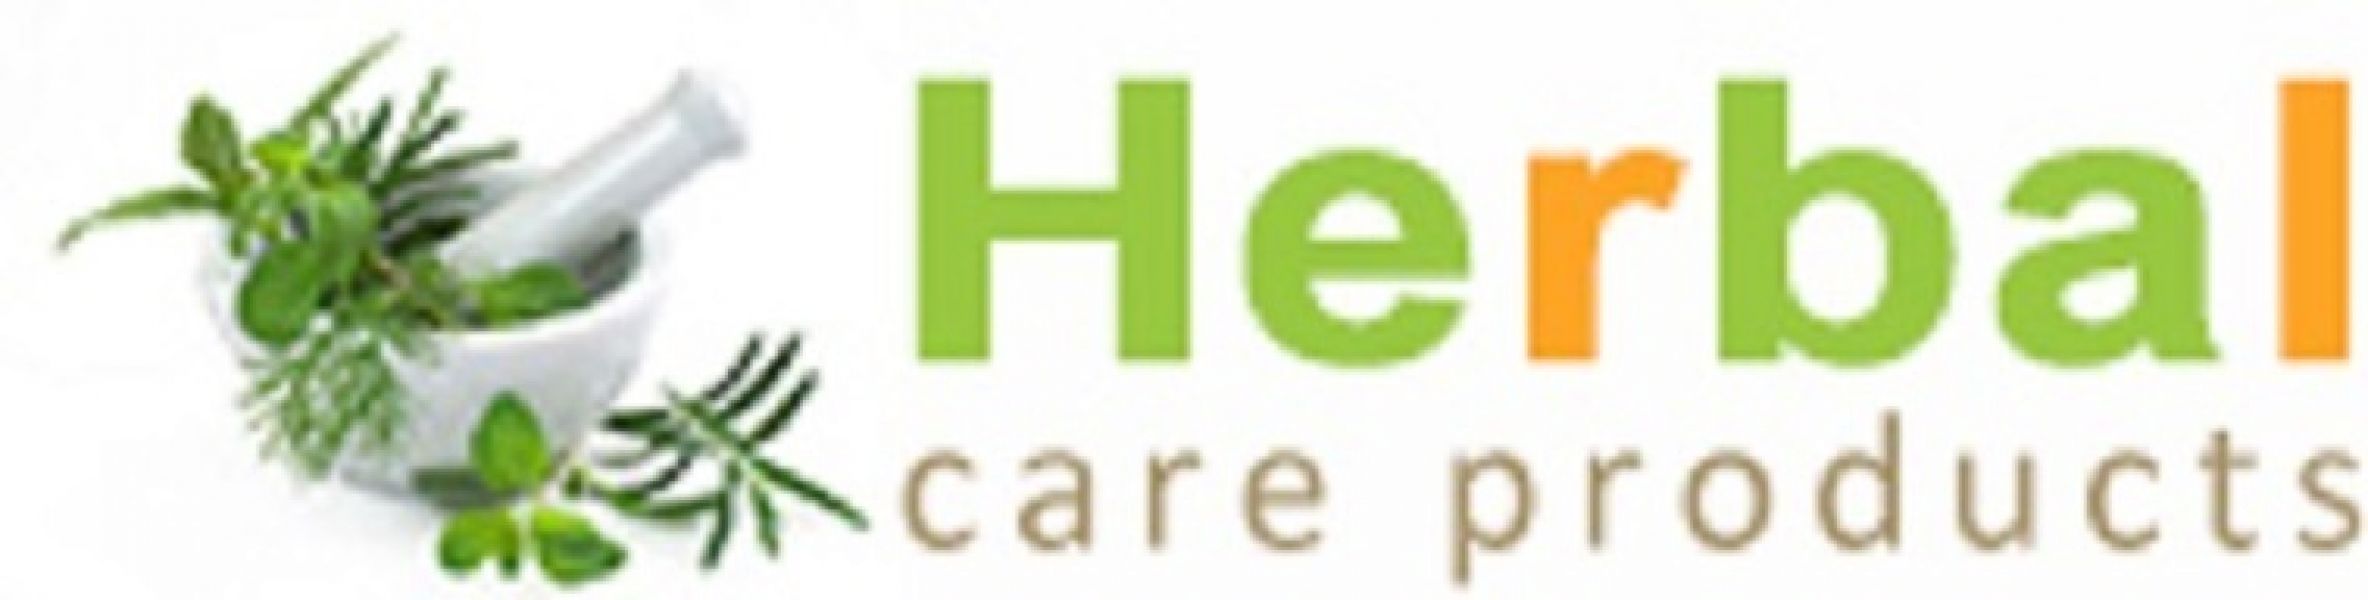 Online Treatment by Herbal Care Products